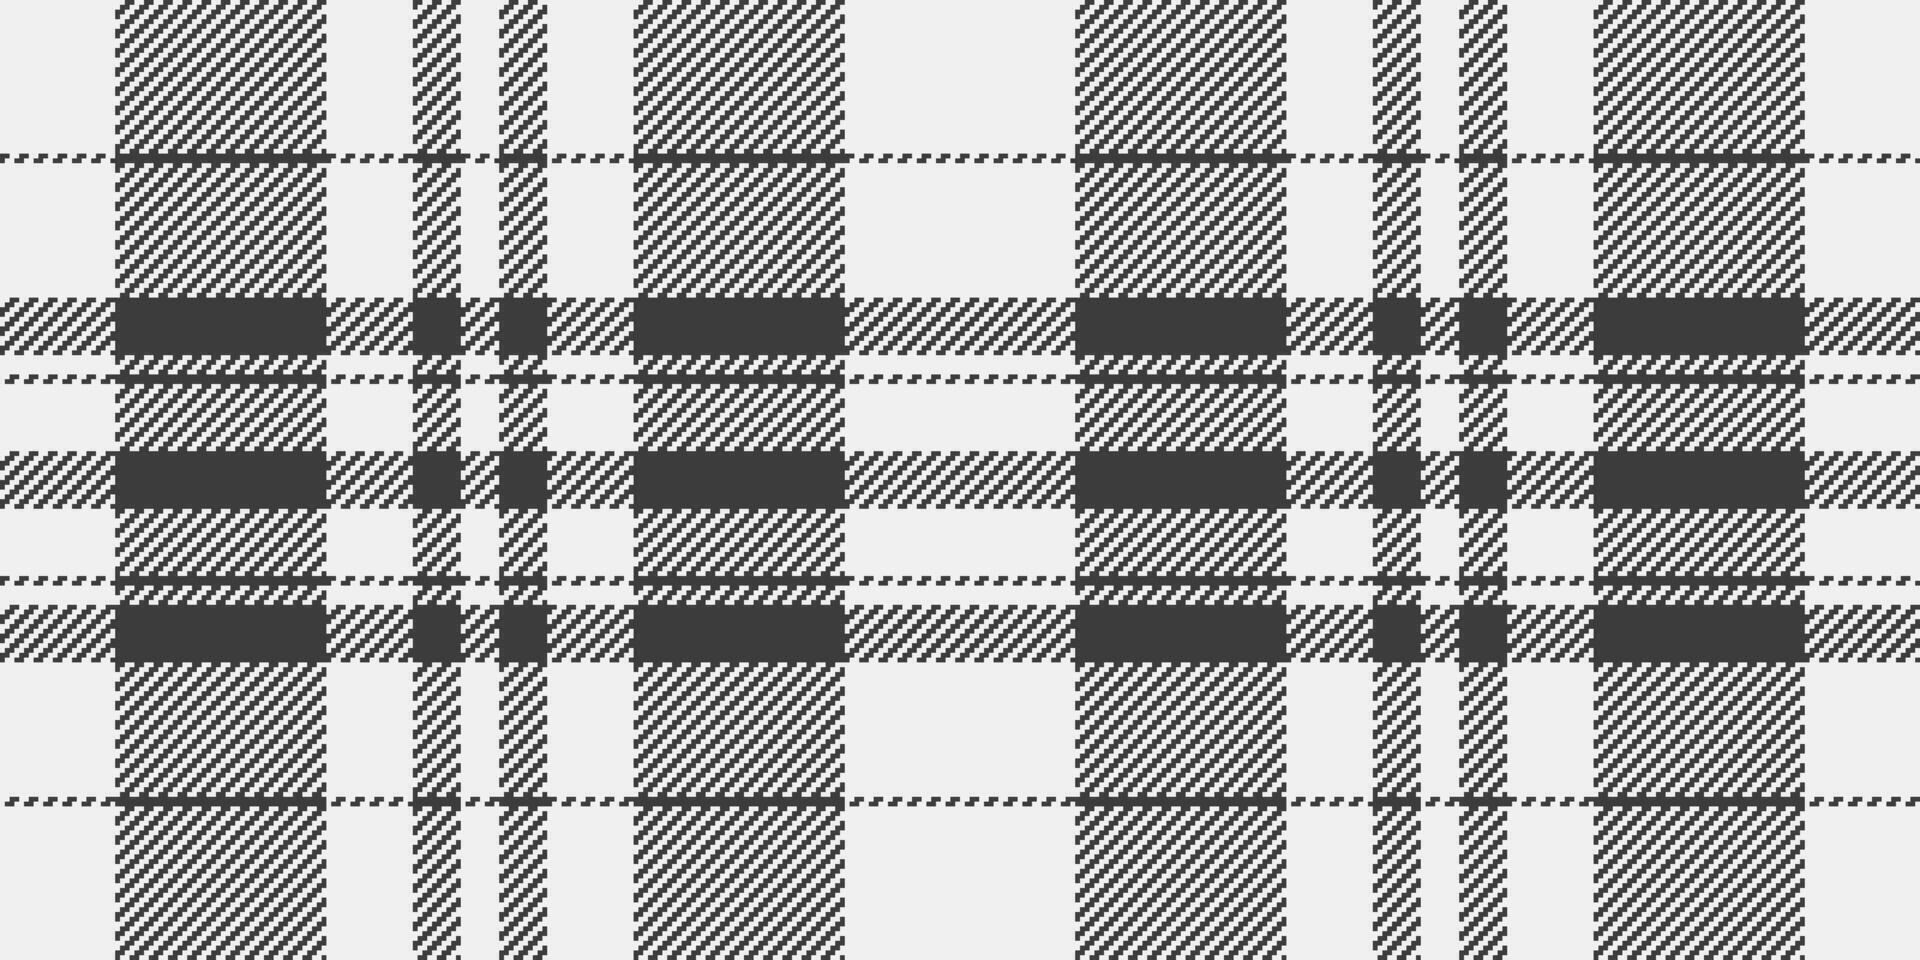 Geometric plaid tartan fabric, deco pattern vector background. Other seamless texture check textile in white and grey colors.